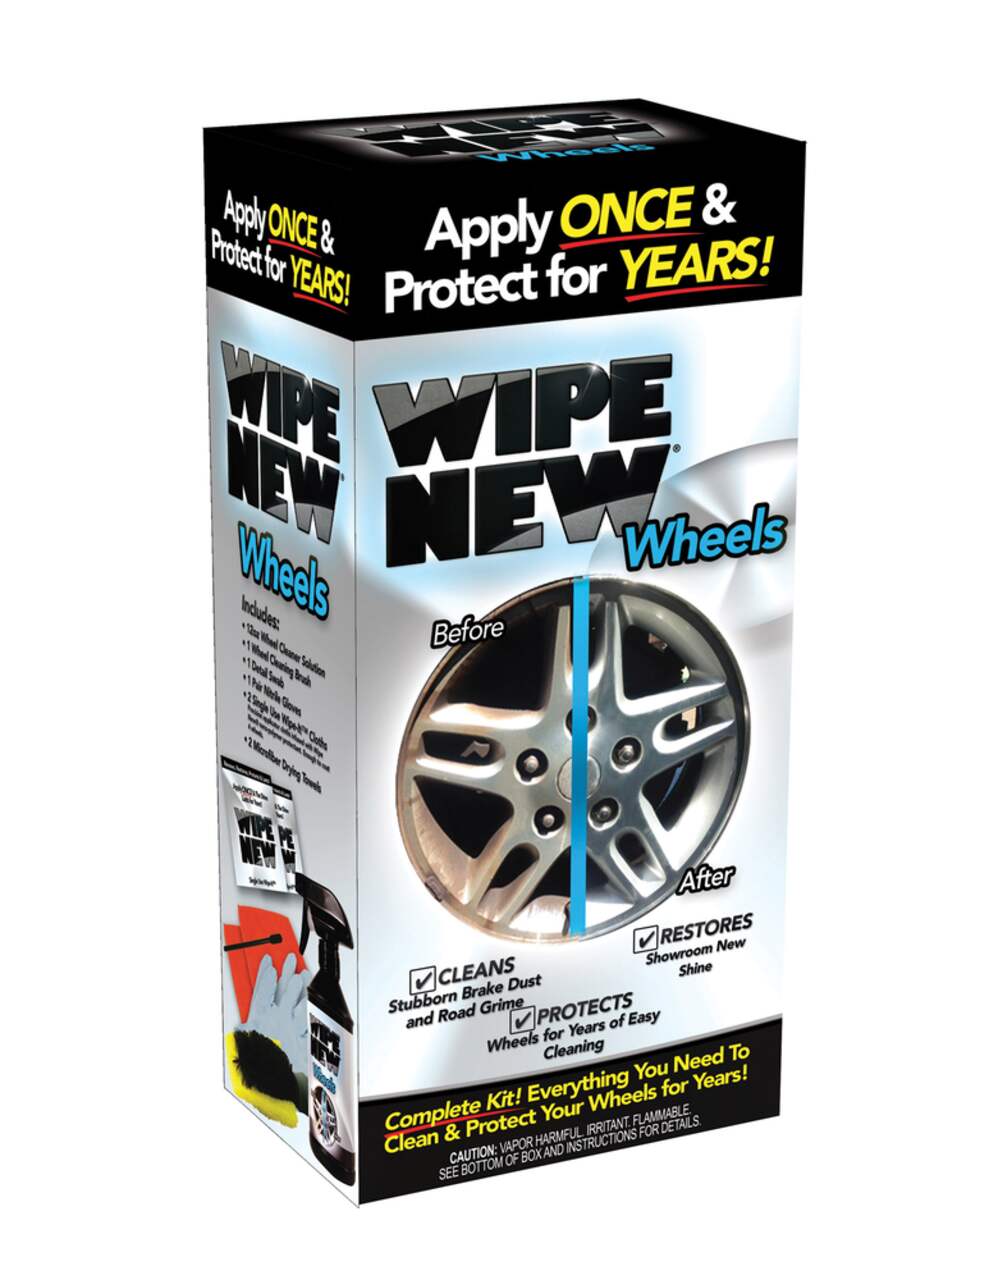 https://media-www.canadiantire.ca/product/automotive/car-care-accessories/auto-cleaning-chemicals/0390757/wipe-new-wheels-28002012-93c8-488d-a683-cb9ff9762eda.png?imdensity=1&imwidth=640&impolicy=mZoom